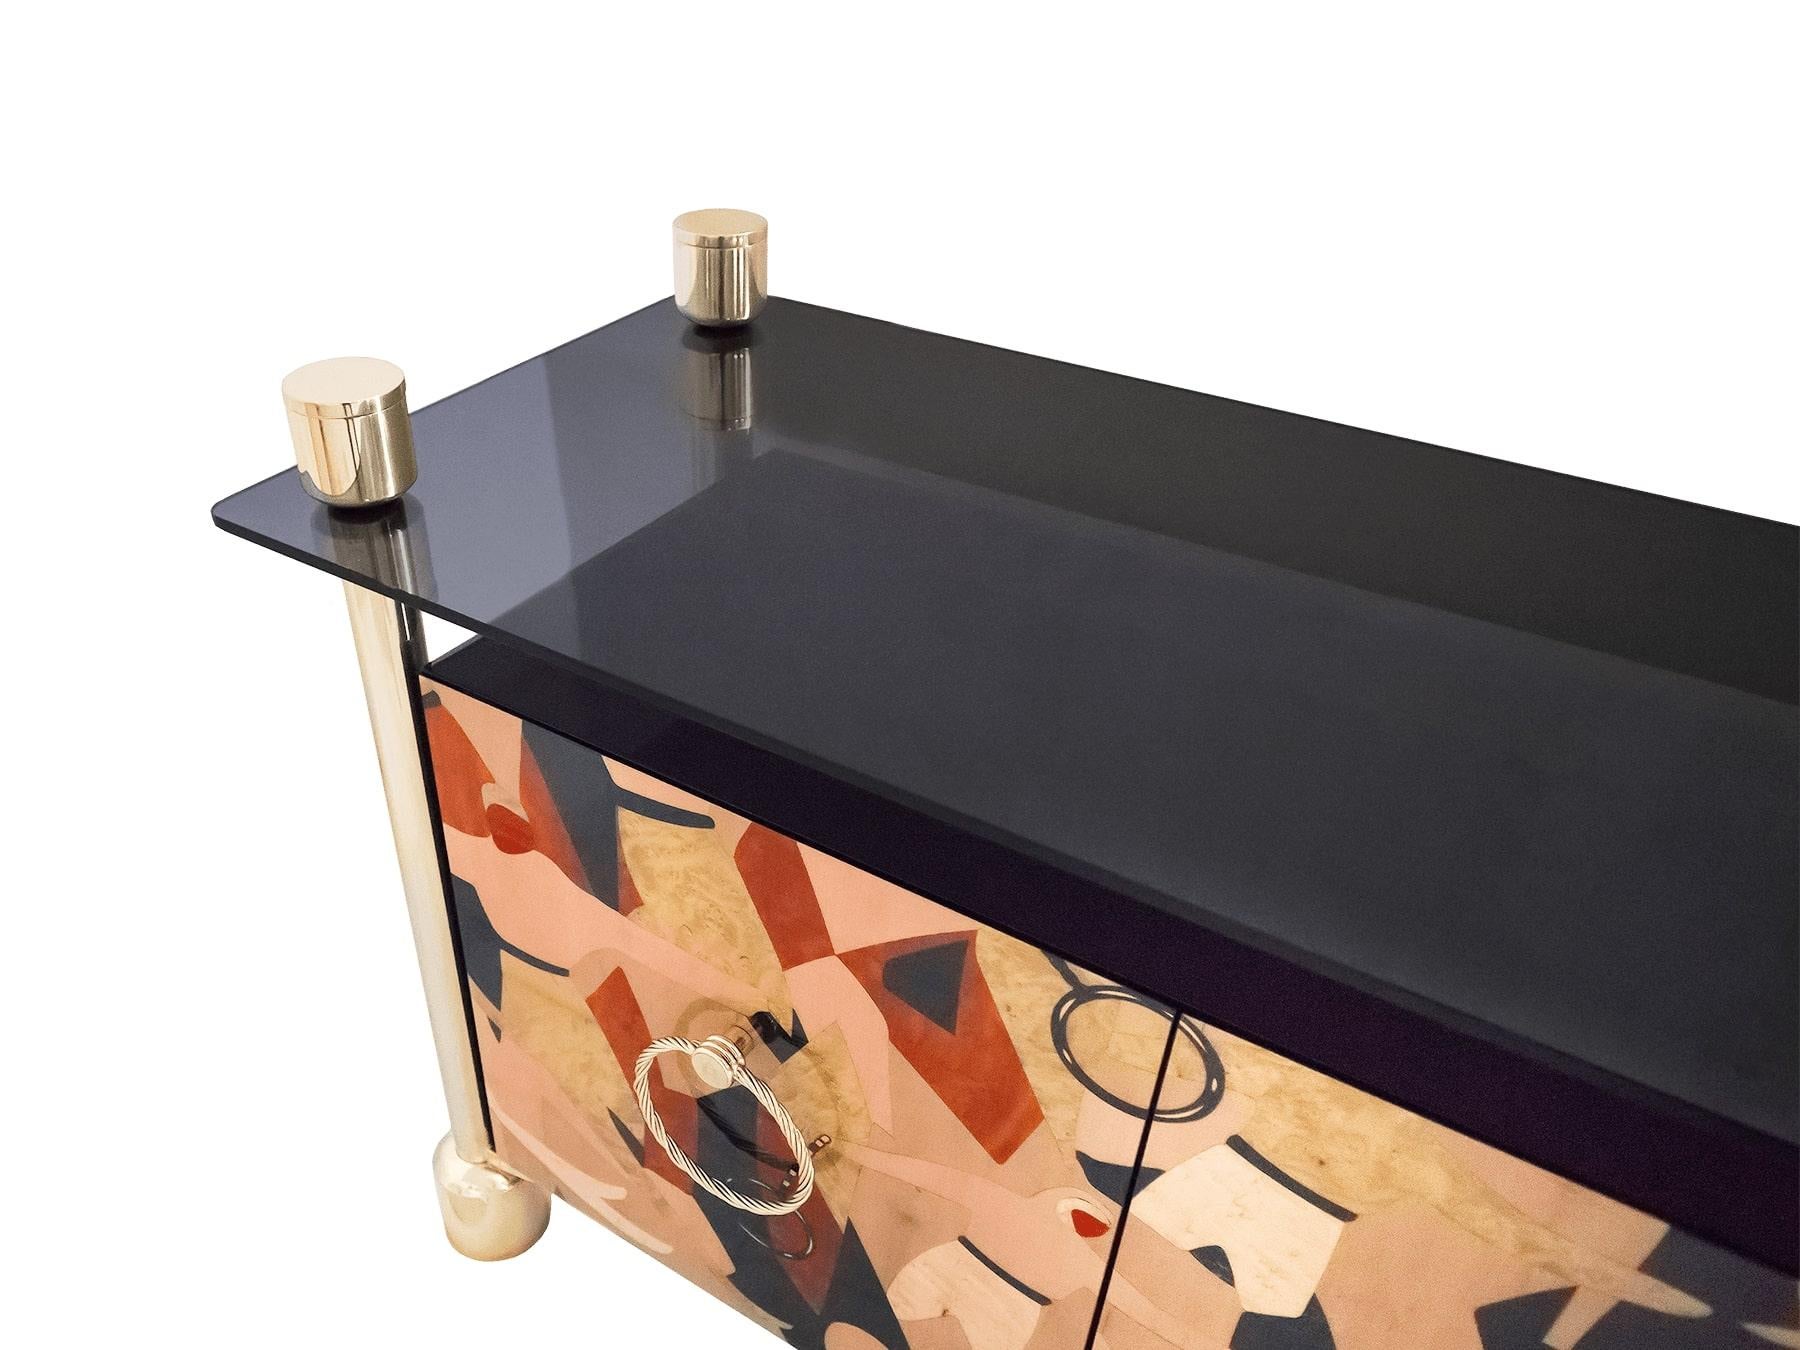 Modern Art Deco Sideboard in Wood Marquetry and Gold Stainless Steel & Glass Top  Rebus Sideboard
Rebus Sideboard is a fusion of two historical design styles: Mid Century and Art Deco.
This living room sideboard was inspired by the glamour of the